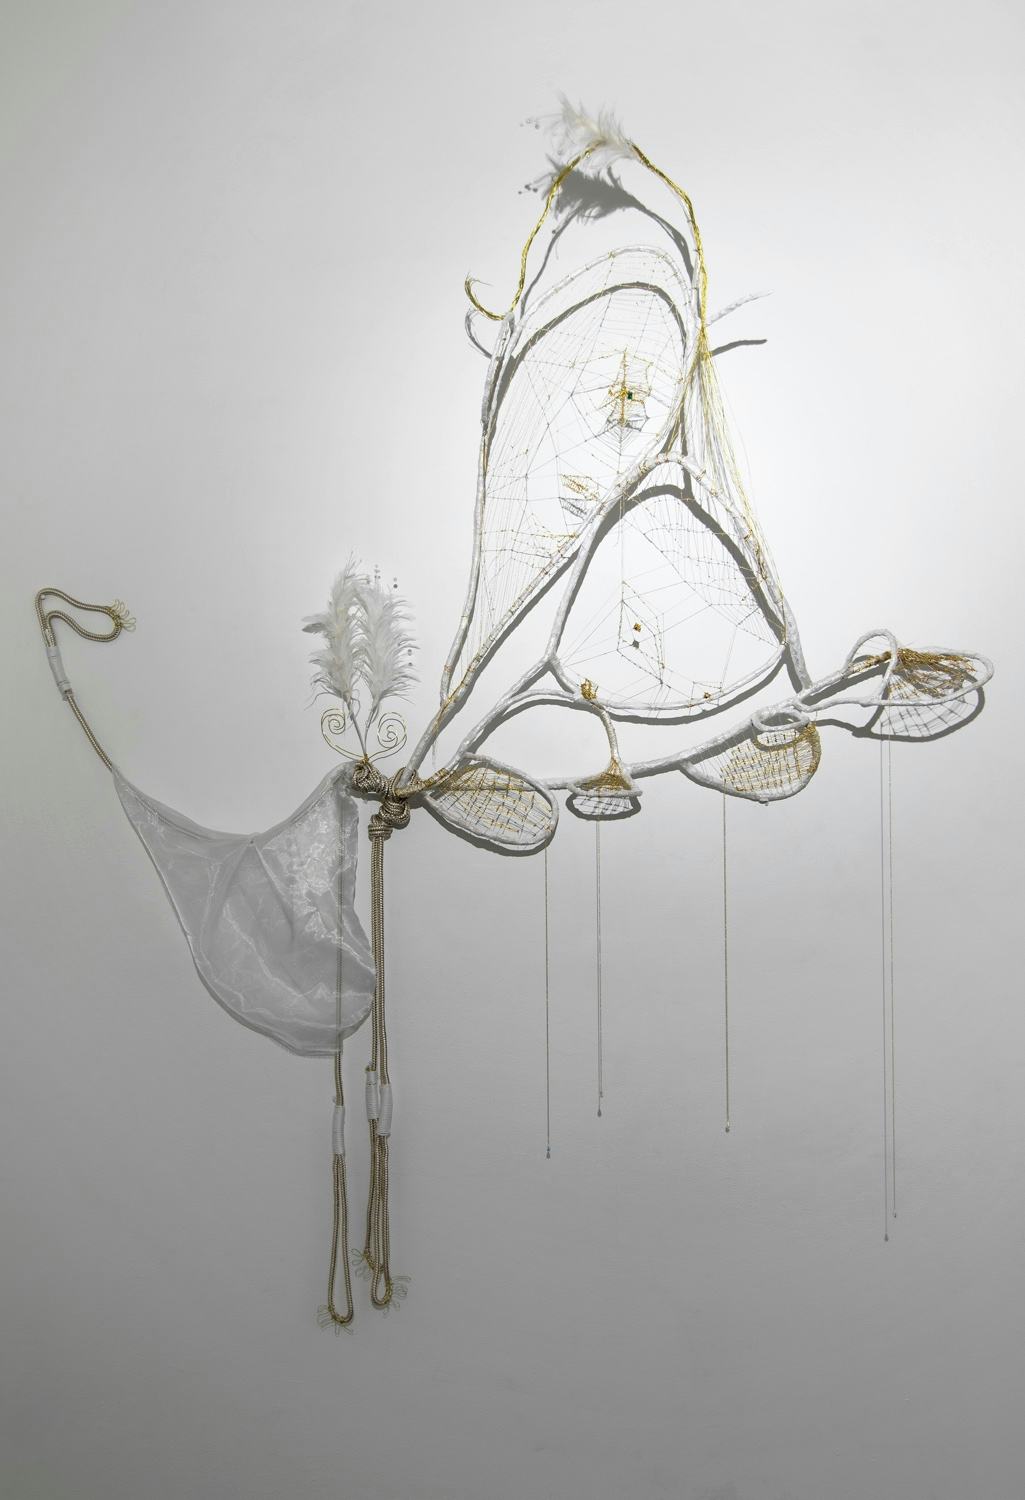 Les Danseurs (2017)
Branches, linen cord, metallic cord, rope, wire, feathers, earrings, charm
